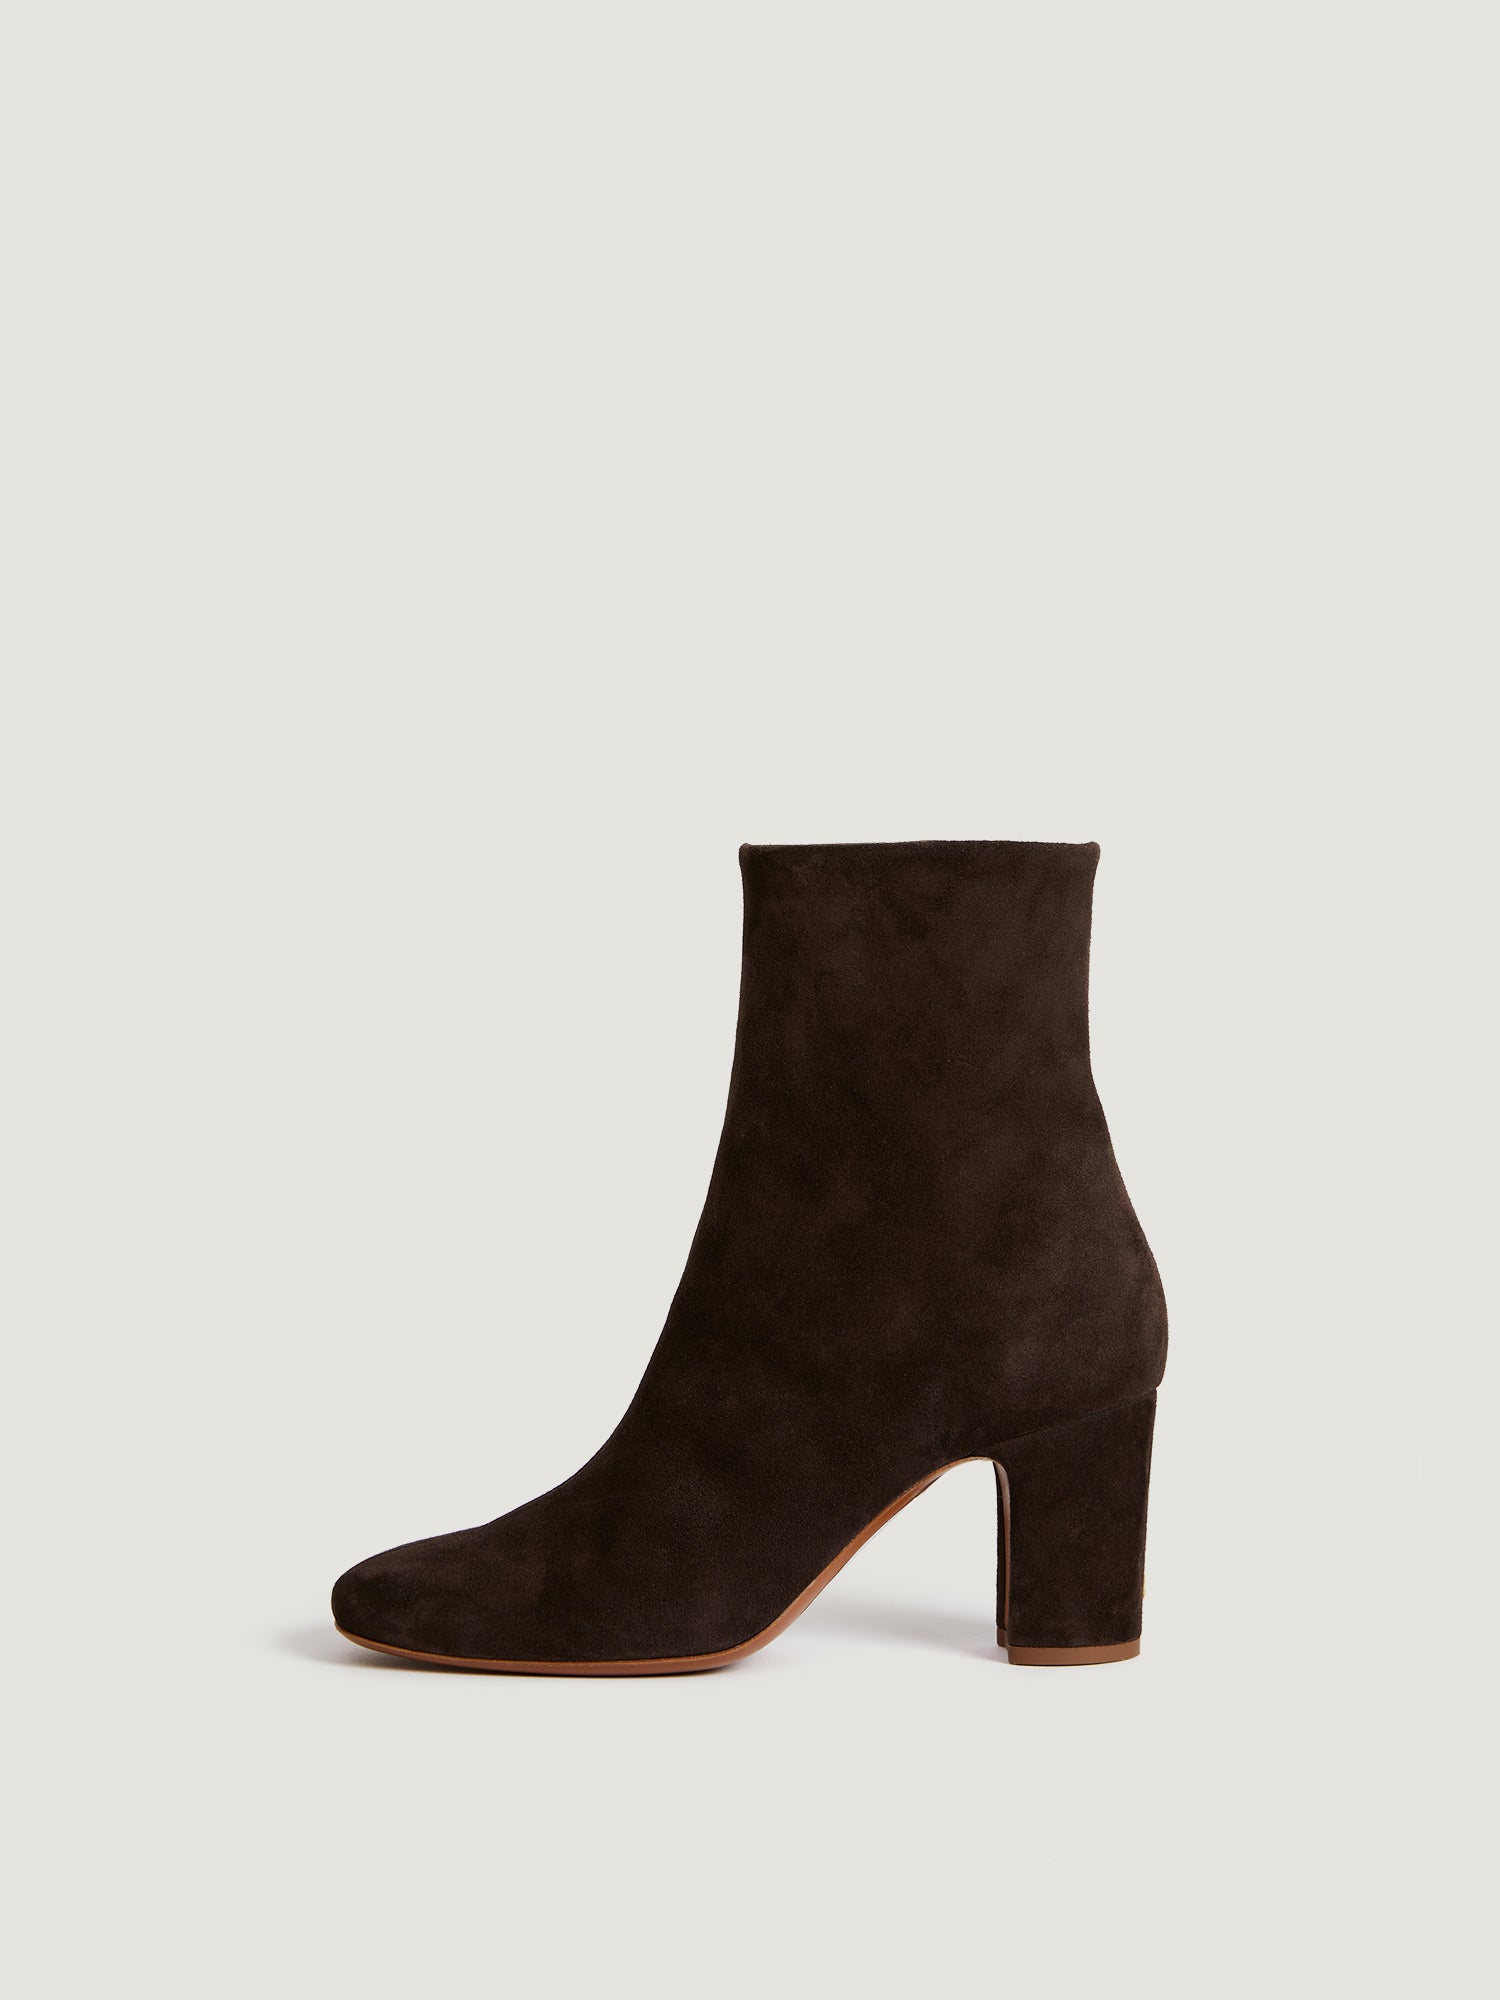 Leather boots in brown suede leather | Rouje • Rouje Paris